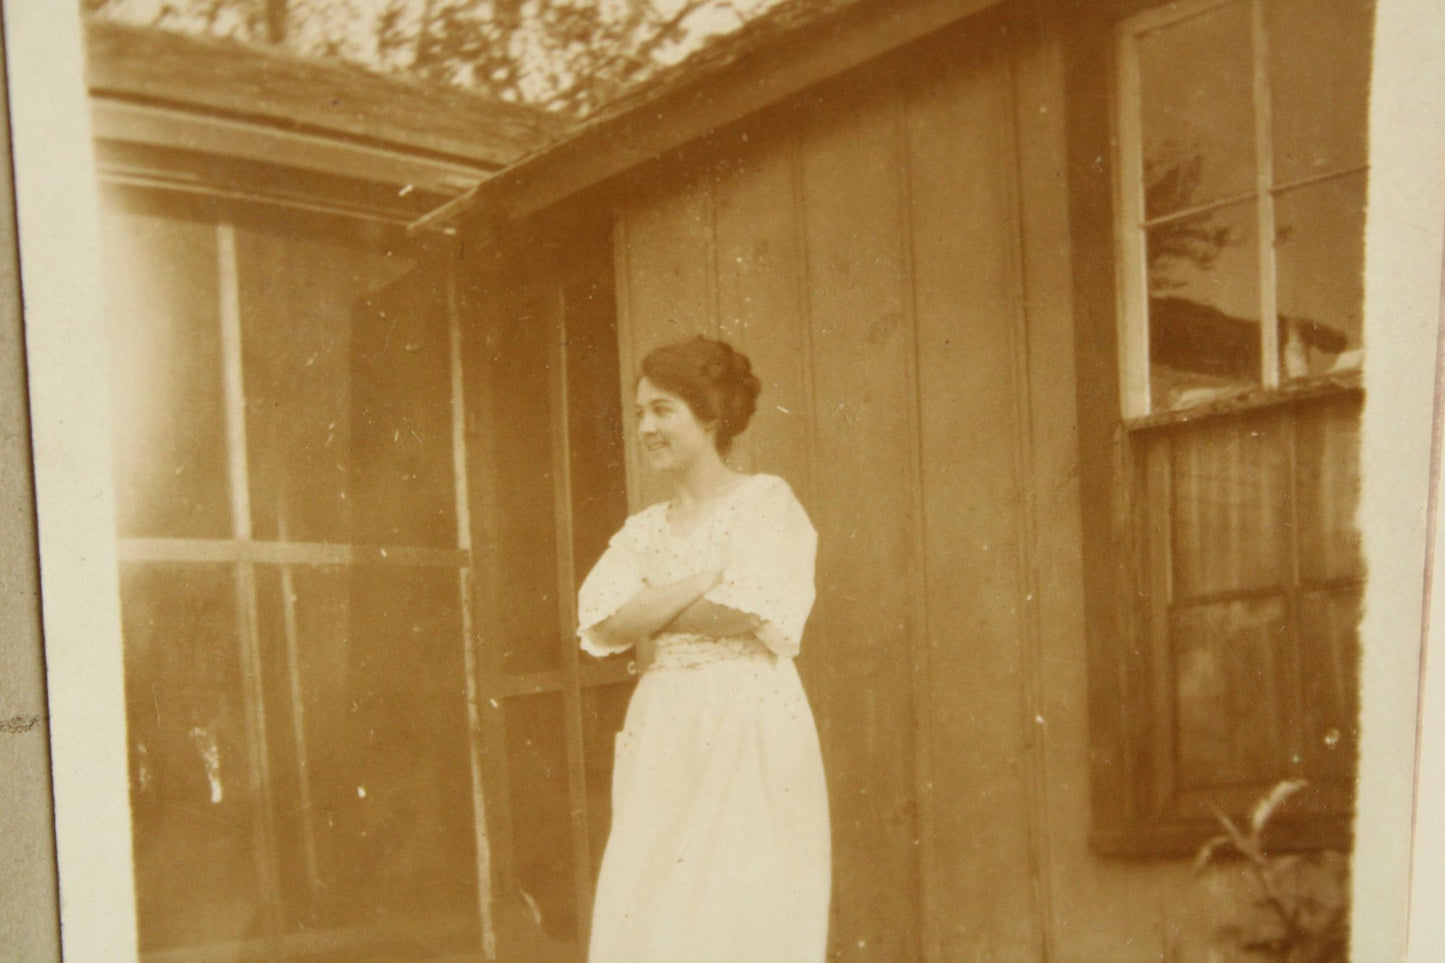 Vintage 1910s Photograph of a Smiling Woman